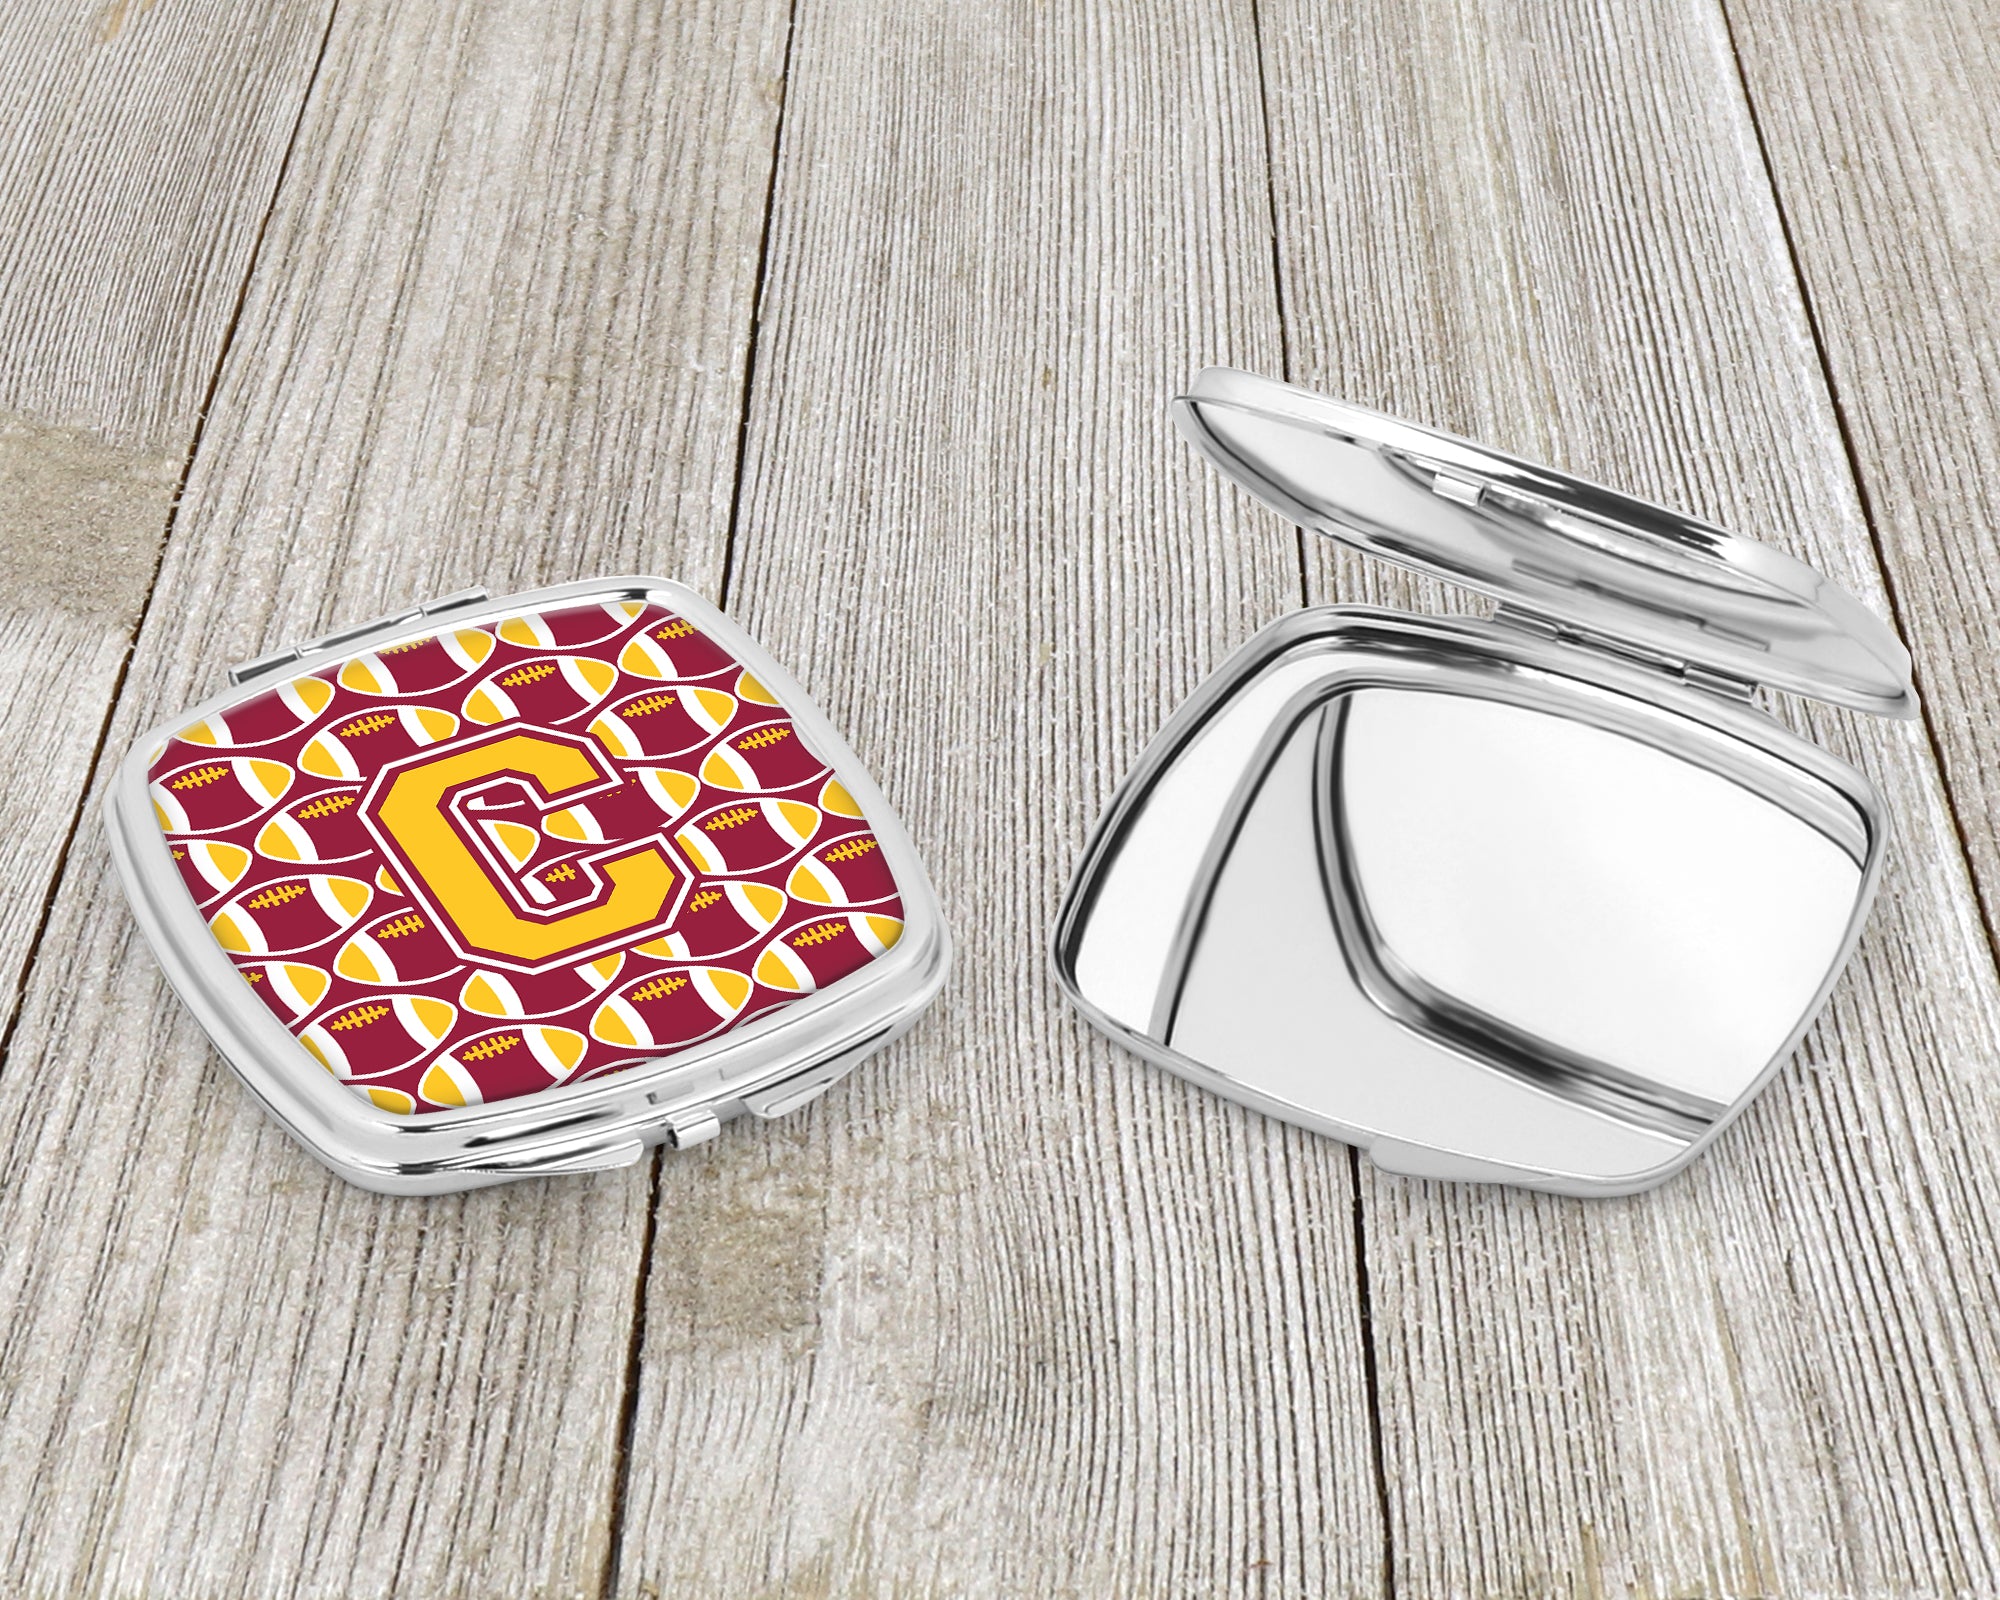 Letter C Football Maroon and Gold Compact Mirror CJ1081-CSCM  the-store.com.